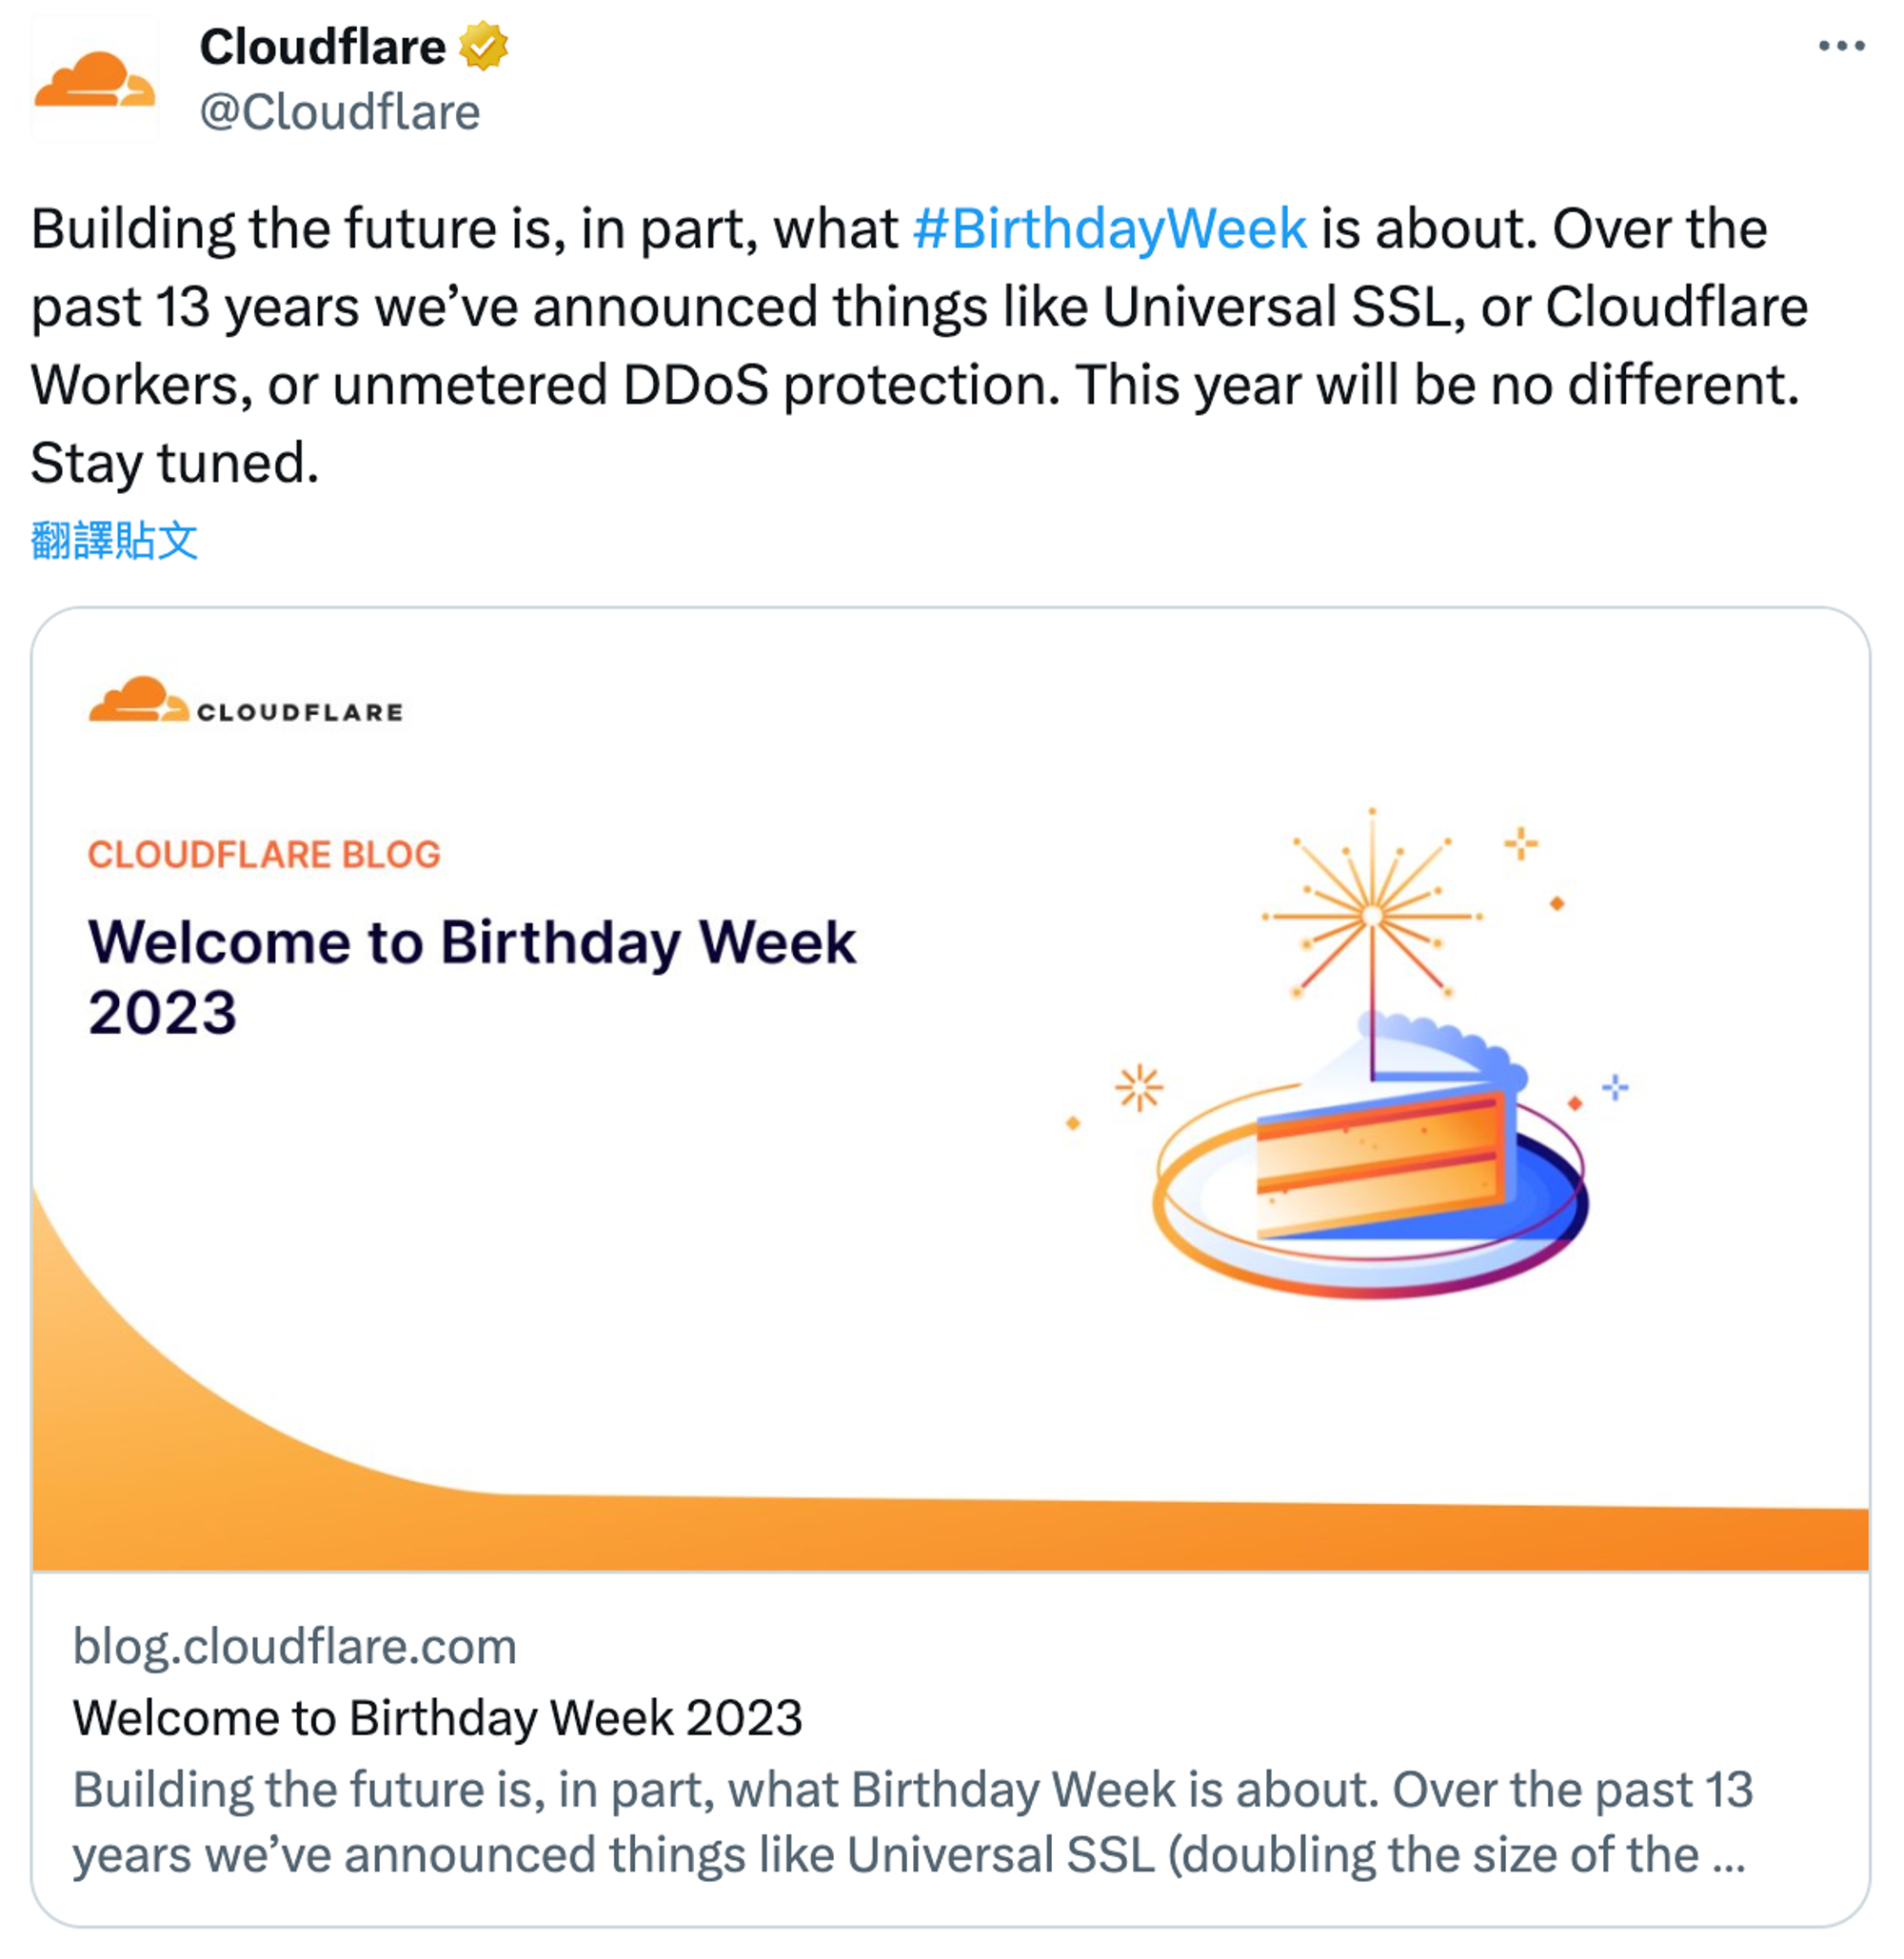 src: https://blog.cloudflare.com/welcome-to-birthday-week-2023/